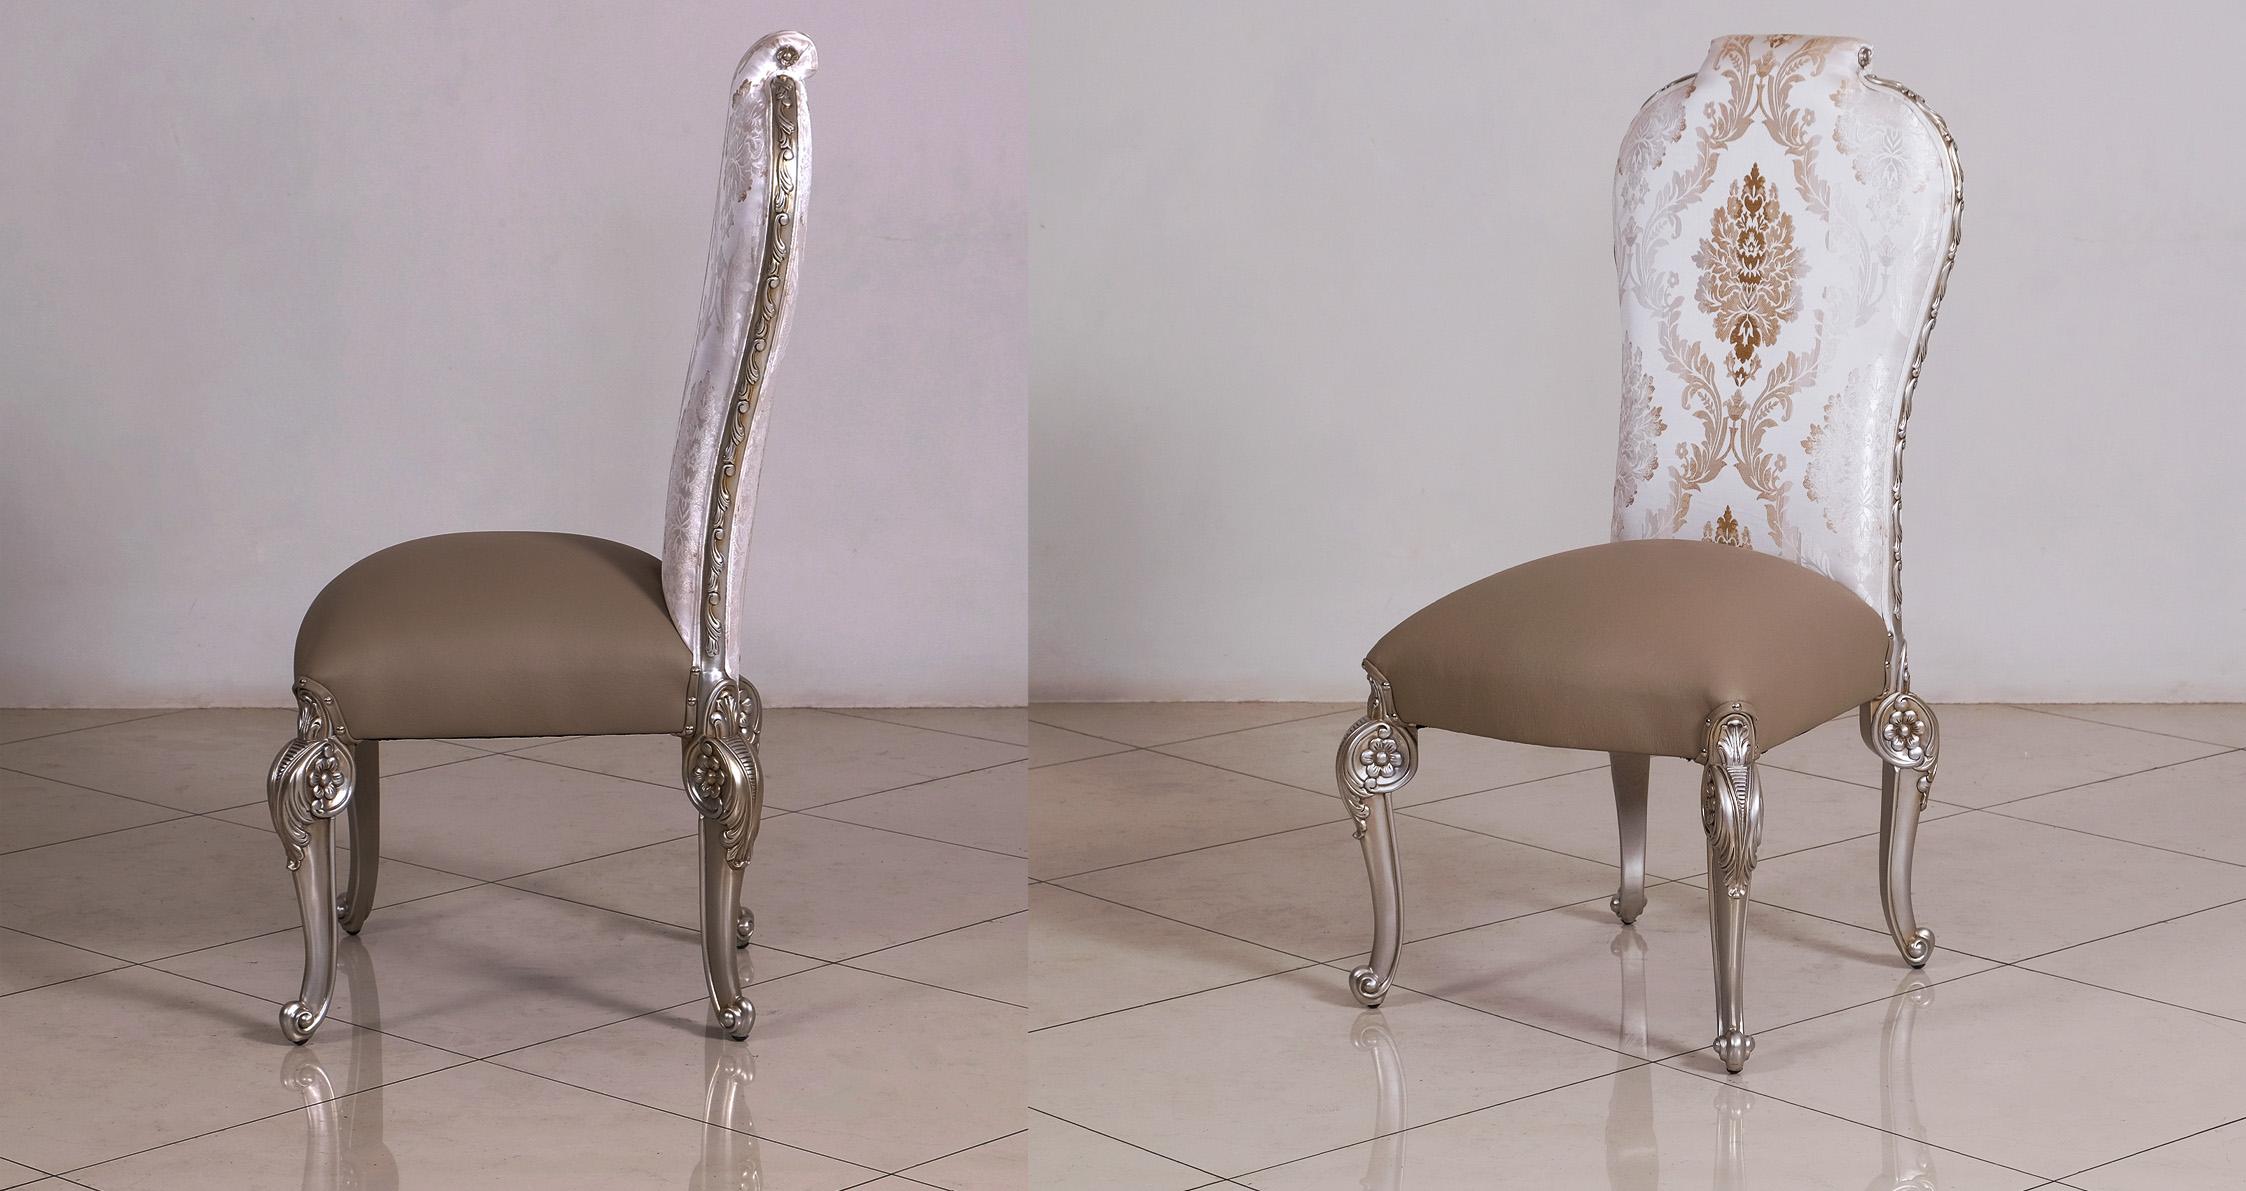 Contemporary, Modern Dining Chair Set BELLAGIO 40050-SC-Set-2 in Antique Silver, Pearl Leather